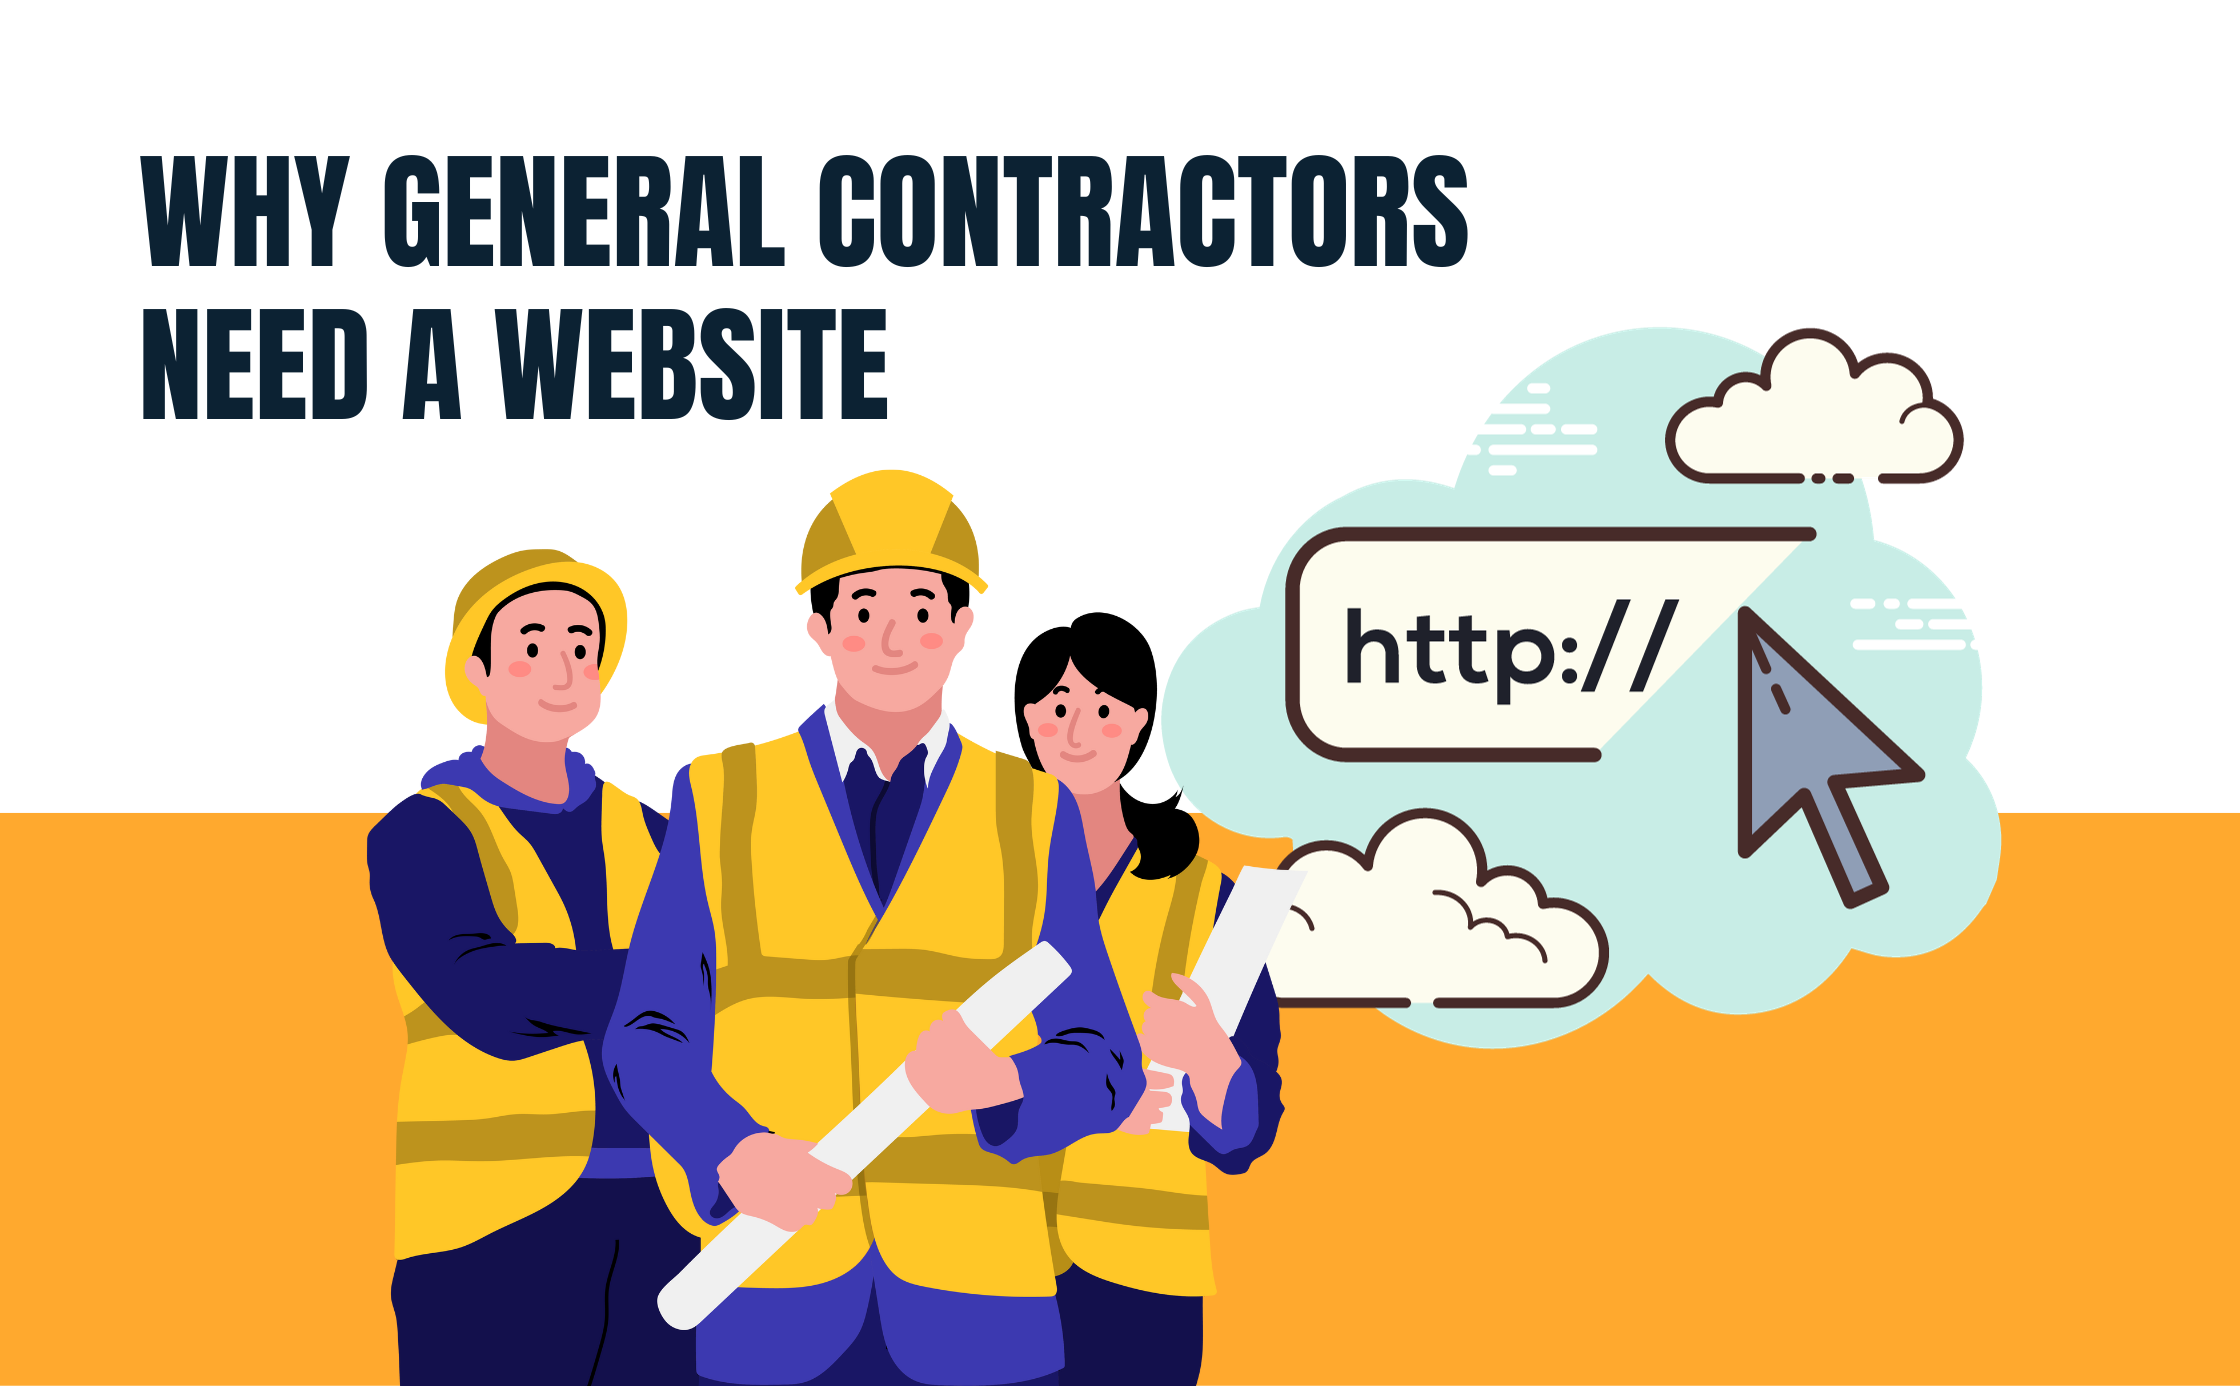 Why General Contractors Need a Website